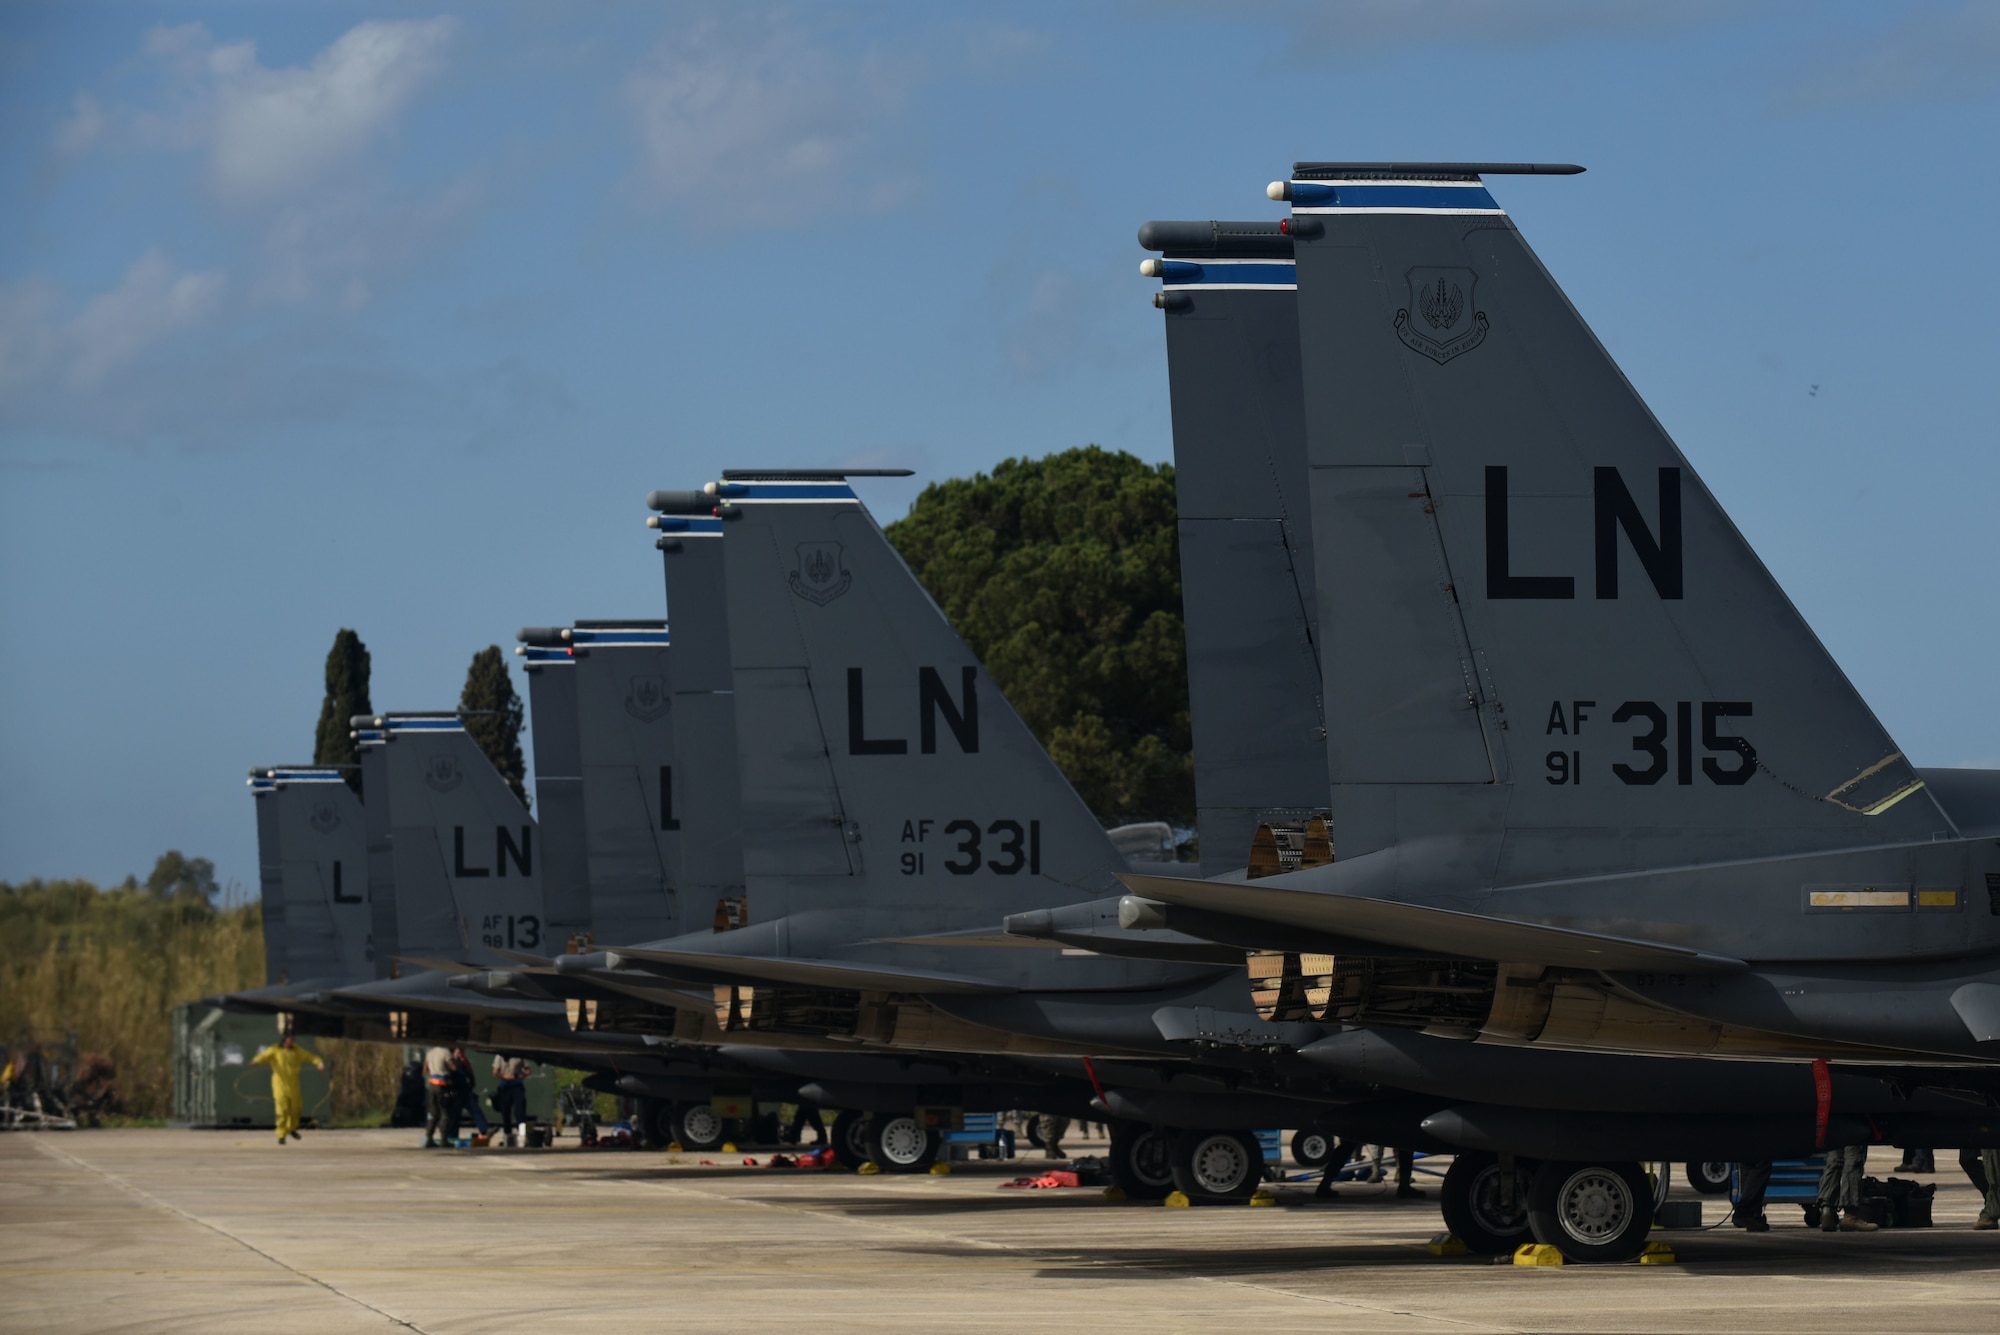 F-15E Strike Eagles, assigned to the 492nd Fighter Squadron from Royal Air Force Lakenheath, England, are staged on the ramp after arriving at Andravida Air Base, Greece, March 7. The 492nd FS is scheduled to participate in INIOHOS 18, a Hellenic Air Force-led, large-force flying exercise that is slated to involve seven countries and over 50 aircraft. (U.S. Air Force photo/Airman 1st Class Eli Chevalier)